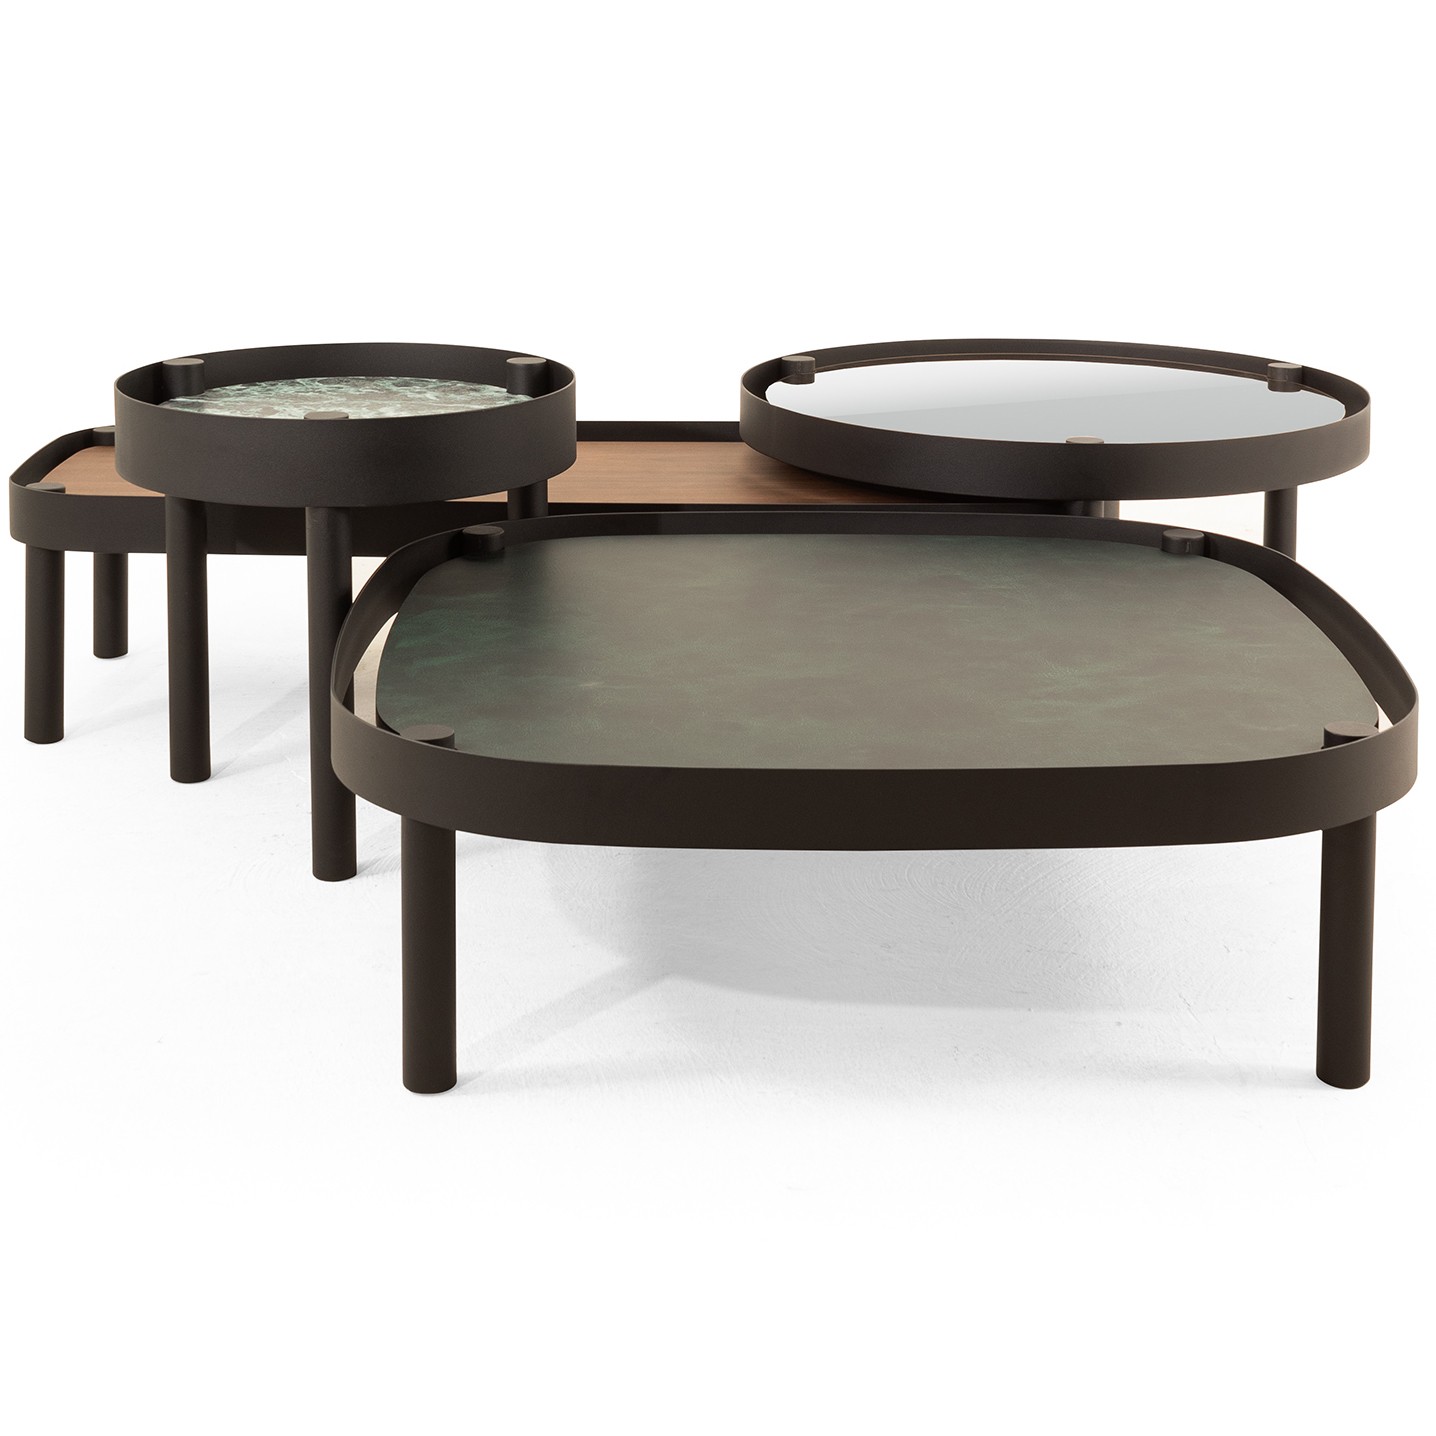 Bohem Vol1 Center Table & Vol2 Center Table With Mirror & Vol3 Center Table & Side Table